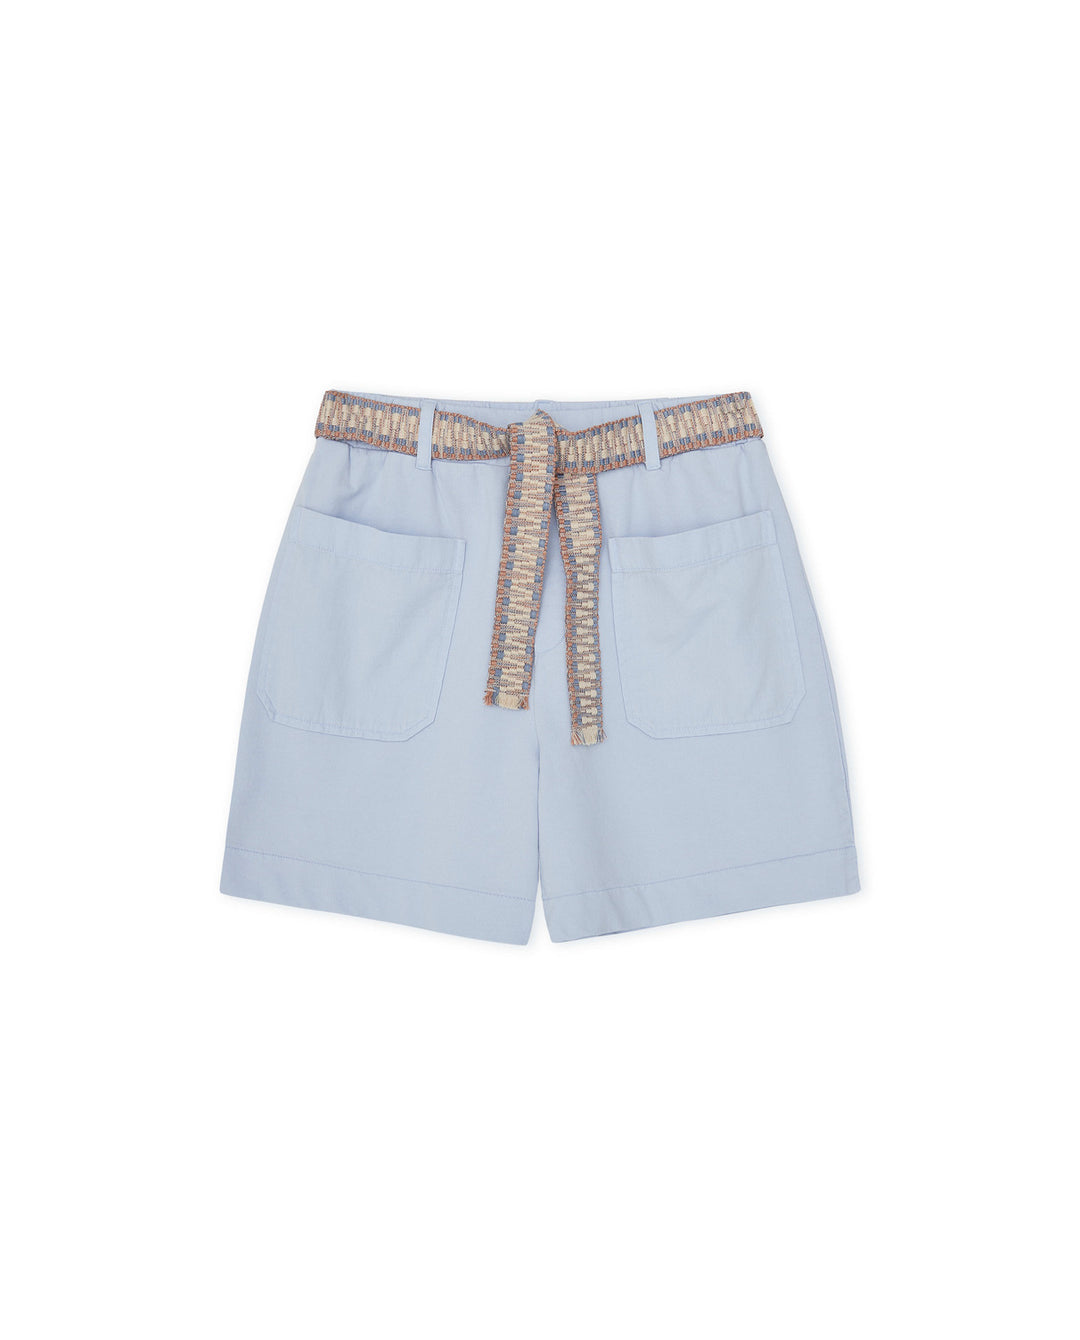 SHORTS WITH WOVEN BELT (SKY BLUE) - YERSE